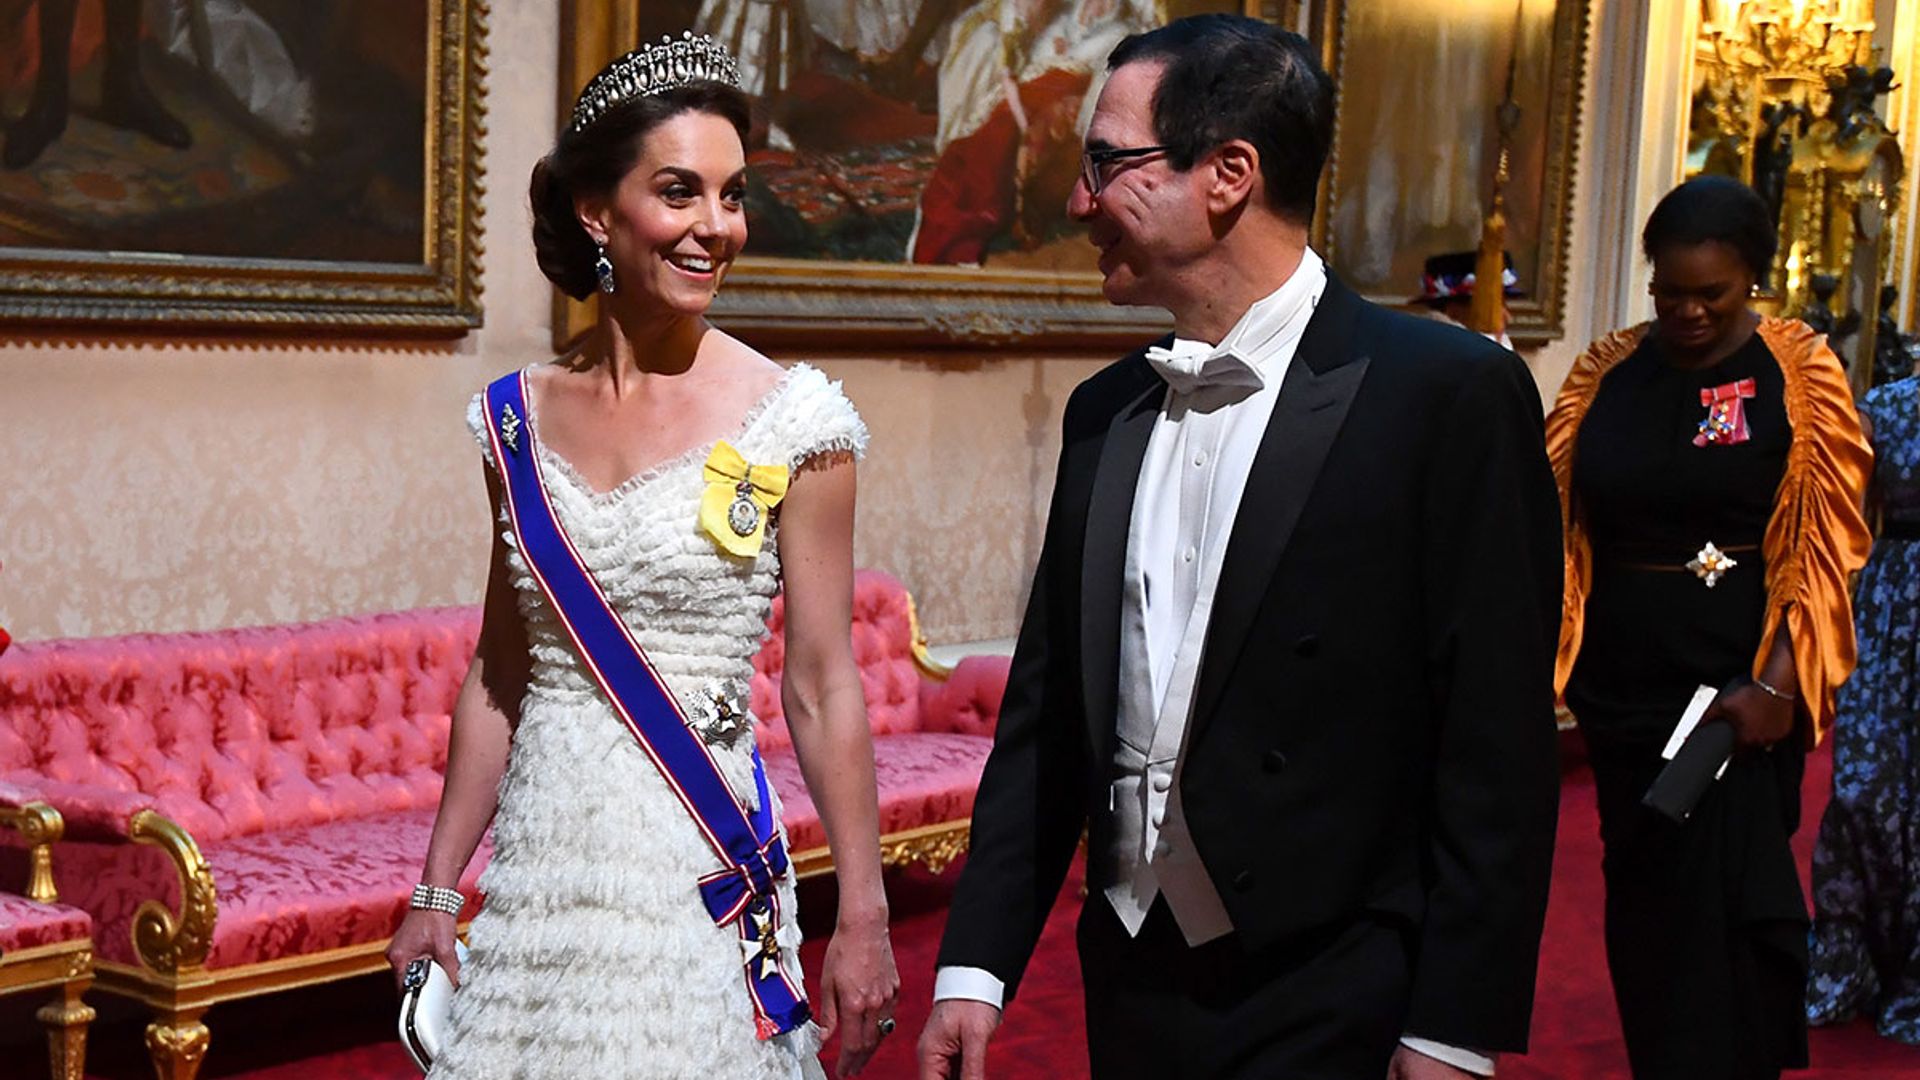 kate middleton at state banquet in white